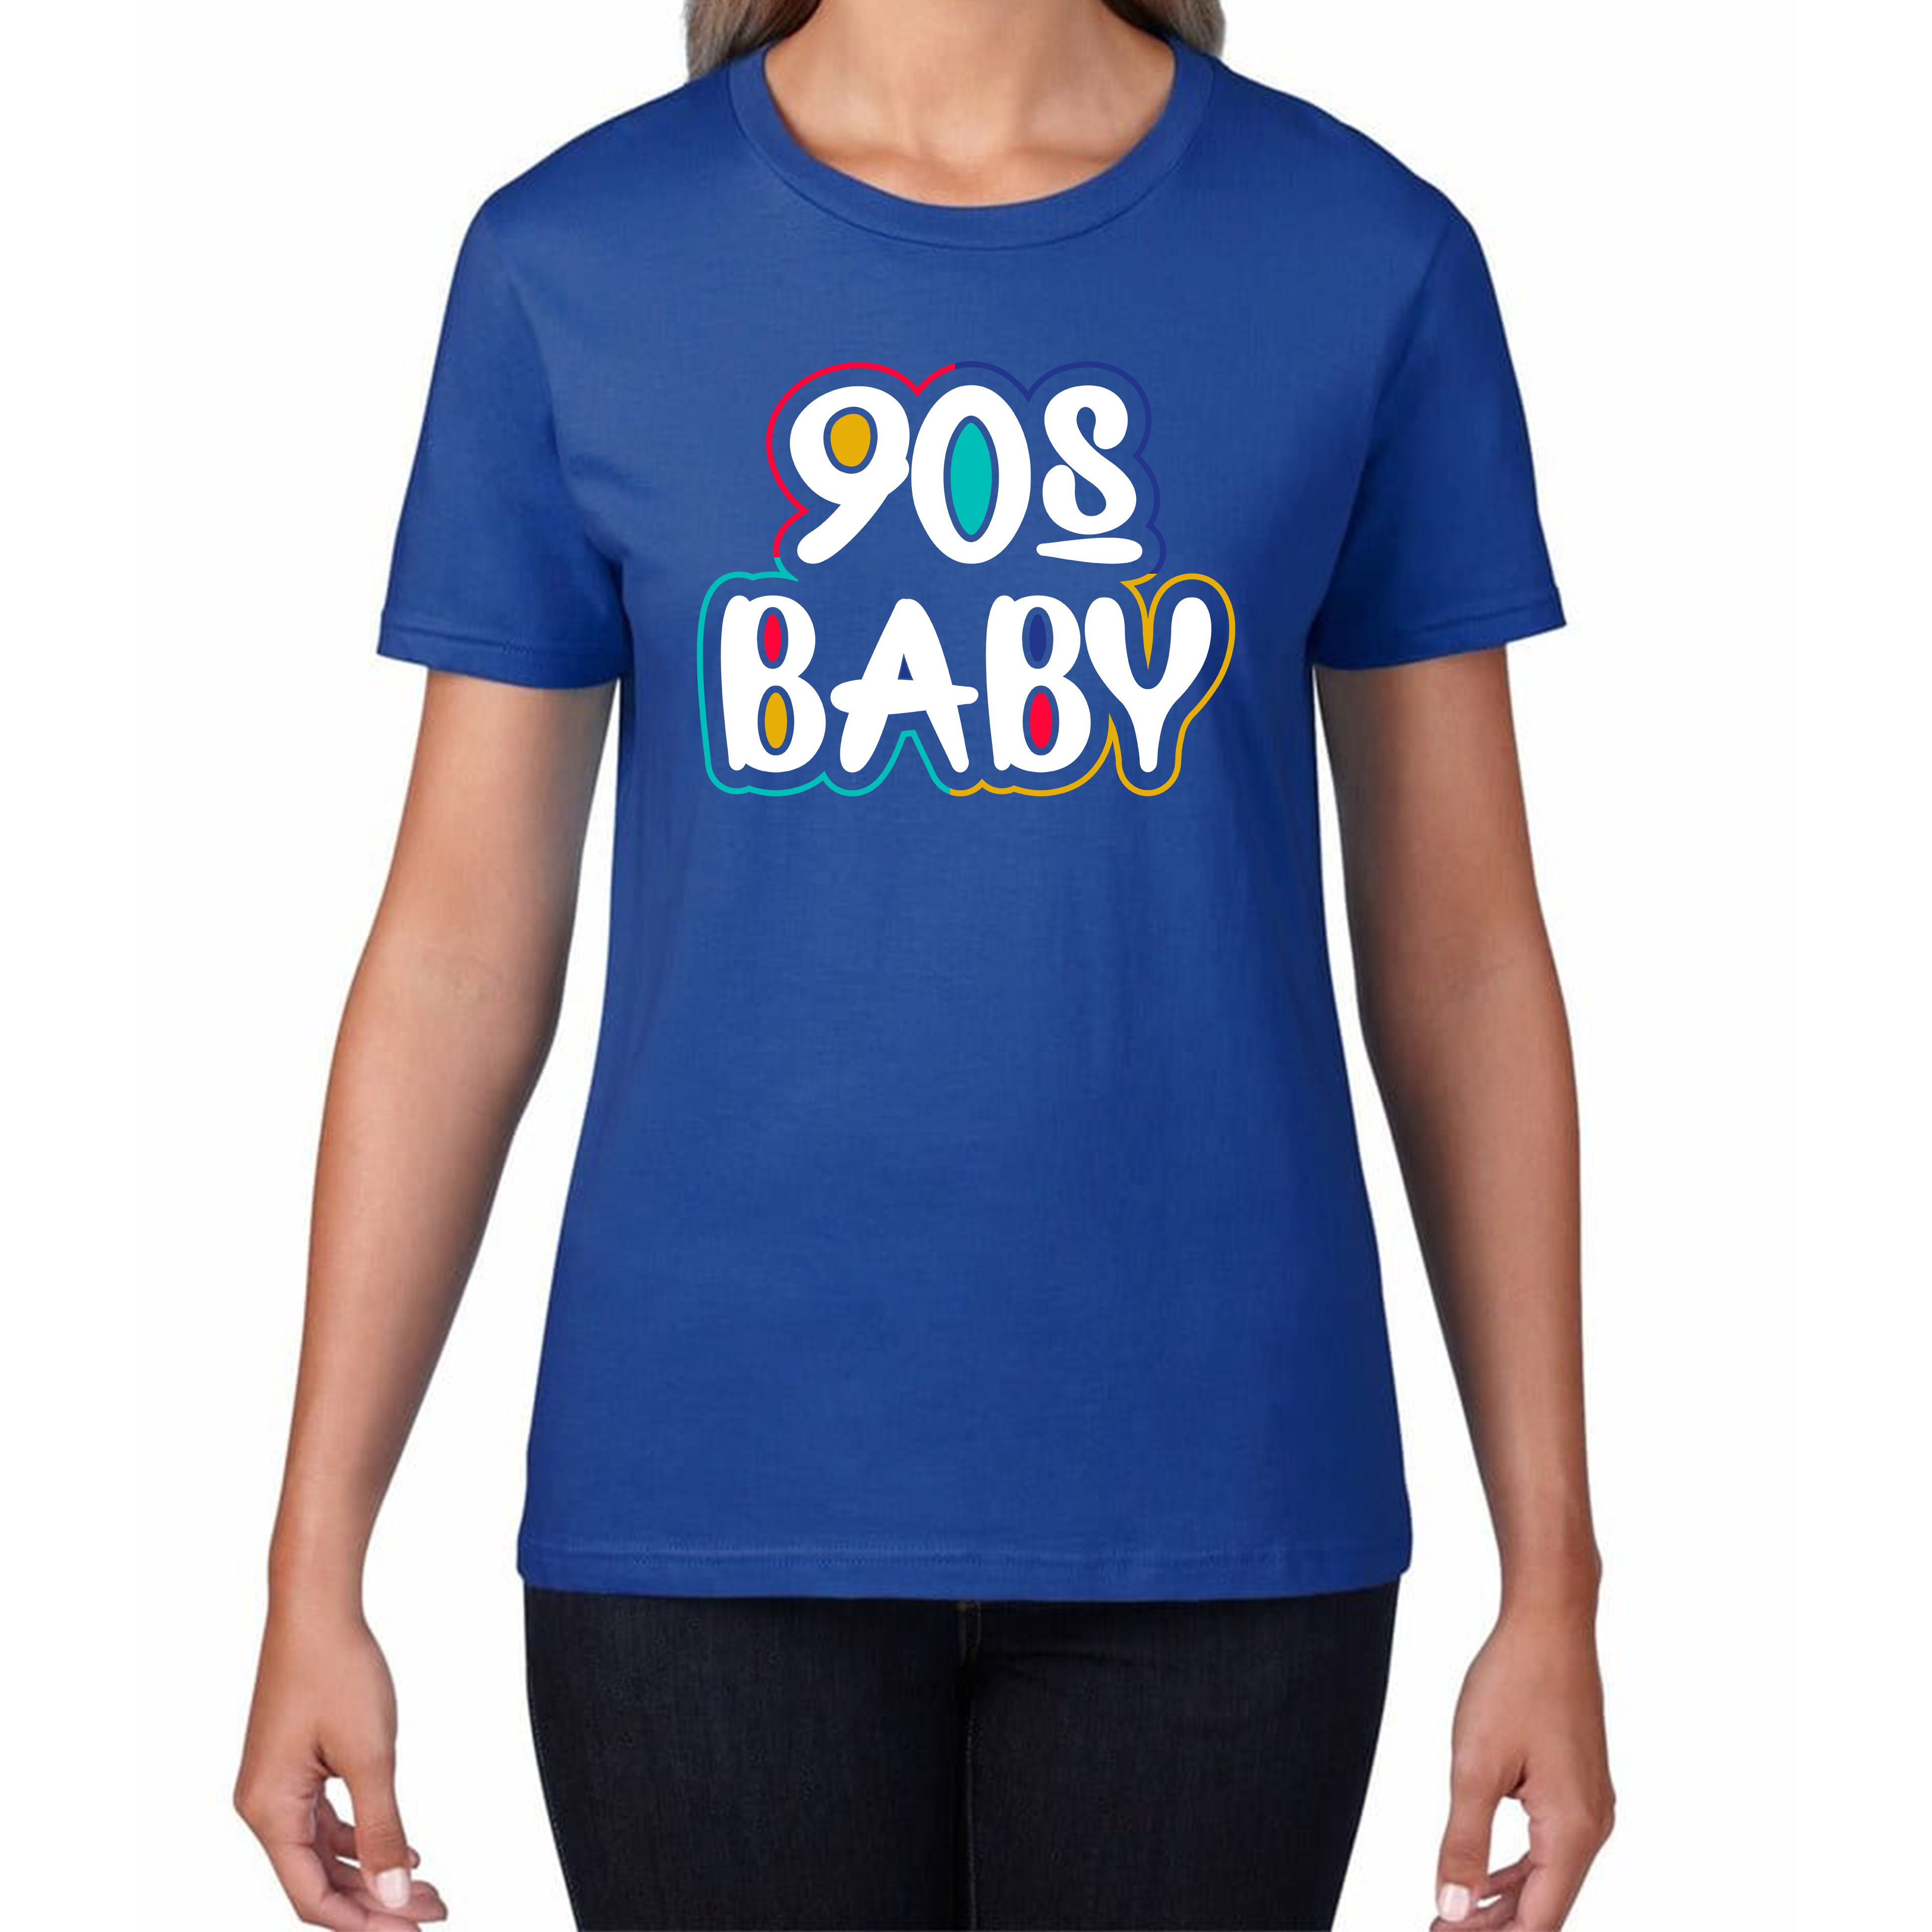 90s Baby T-Shirt Awesome cool 90's baby fashion Vintag Funny Joke Novelty Design Womens Tee Top